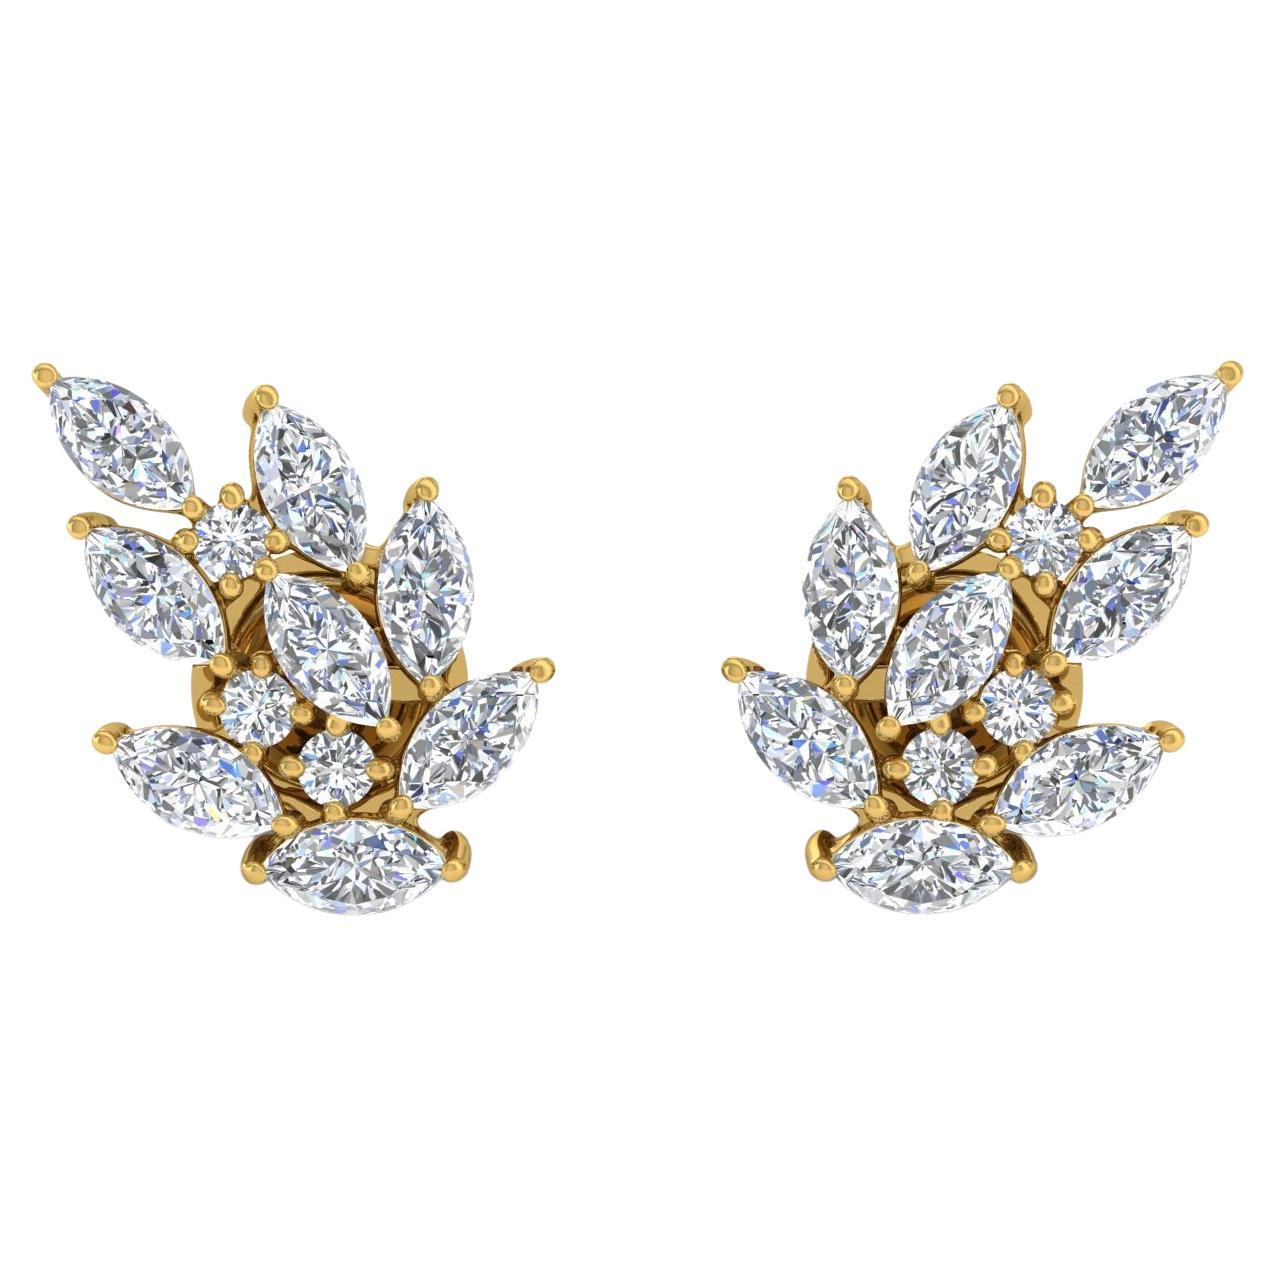 3 Carat SI Clarity HI Color Marquise Diamond Leaf Earrings 18 Karat Yellow Gold For Sale